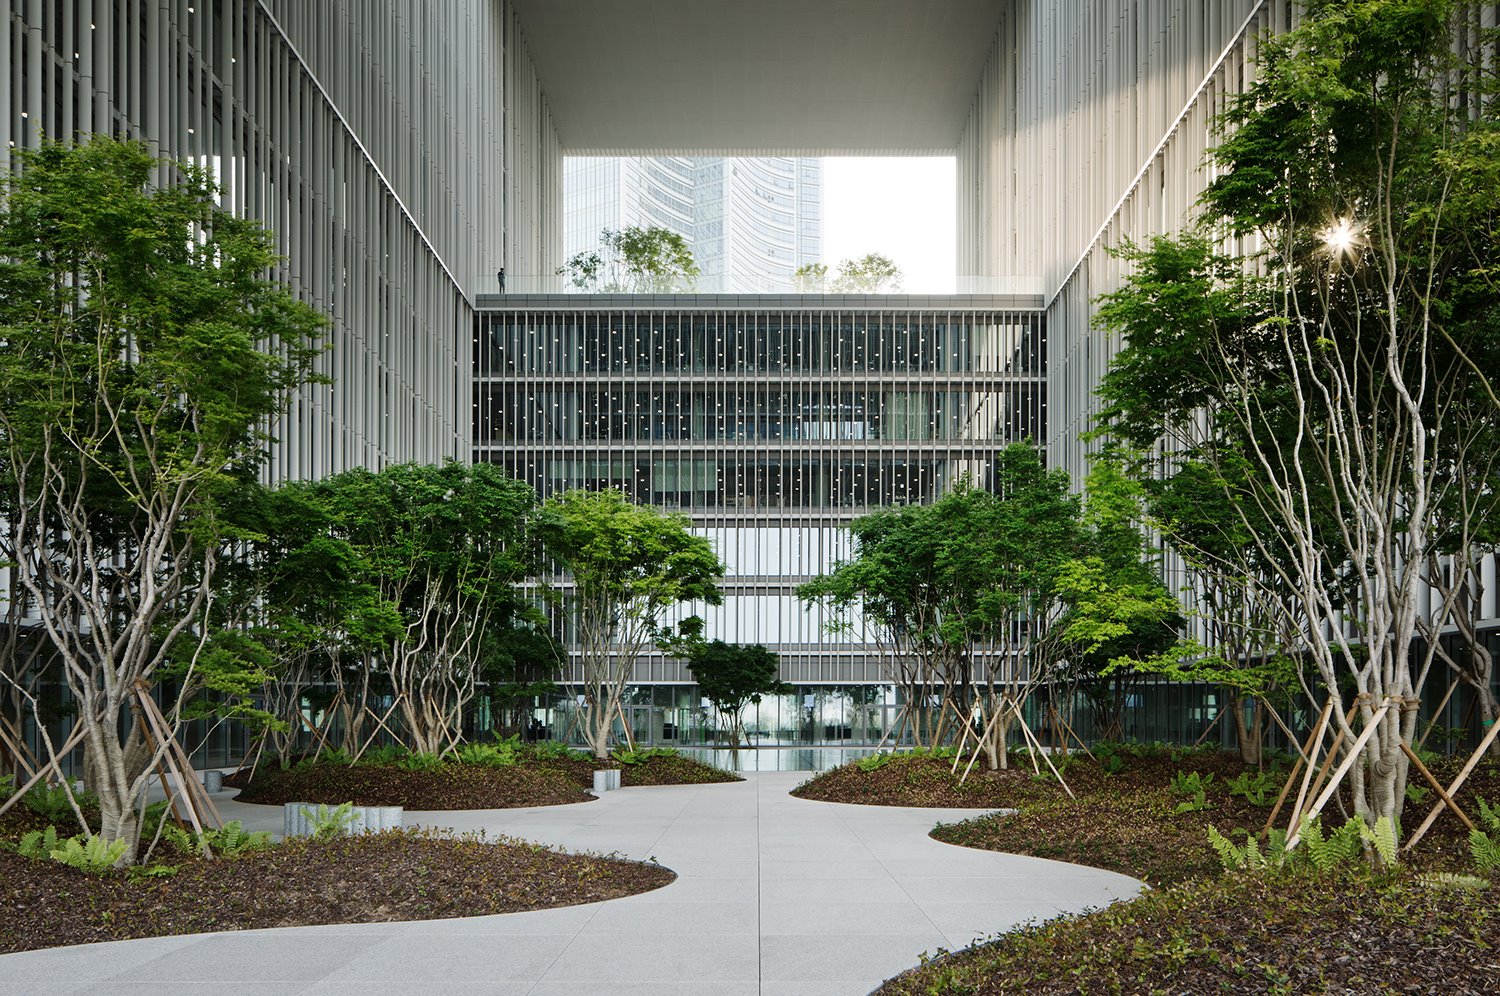 RIBA 2021 Amorepacific Headquarters South Korea David Chipperfield Architects Berlin photograph by Andreas Gehrke Noshe 